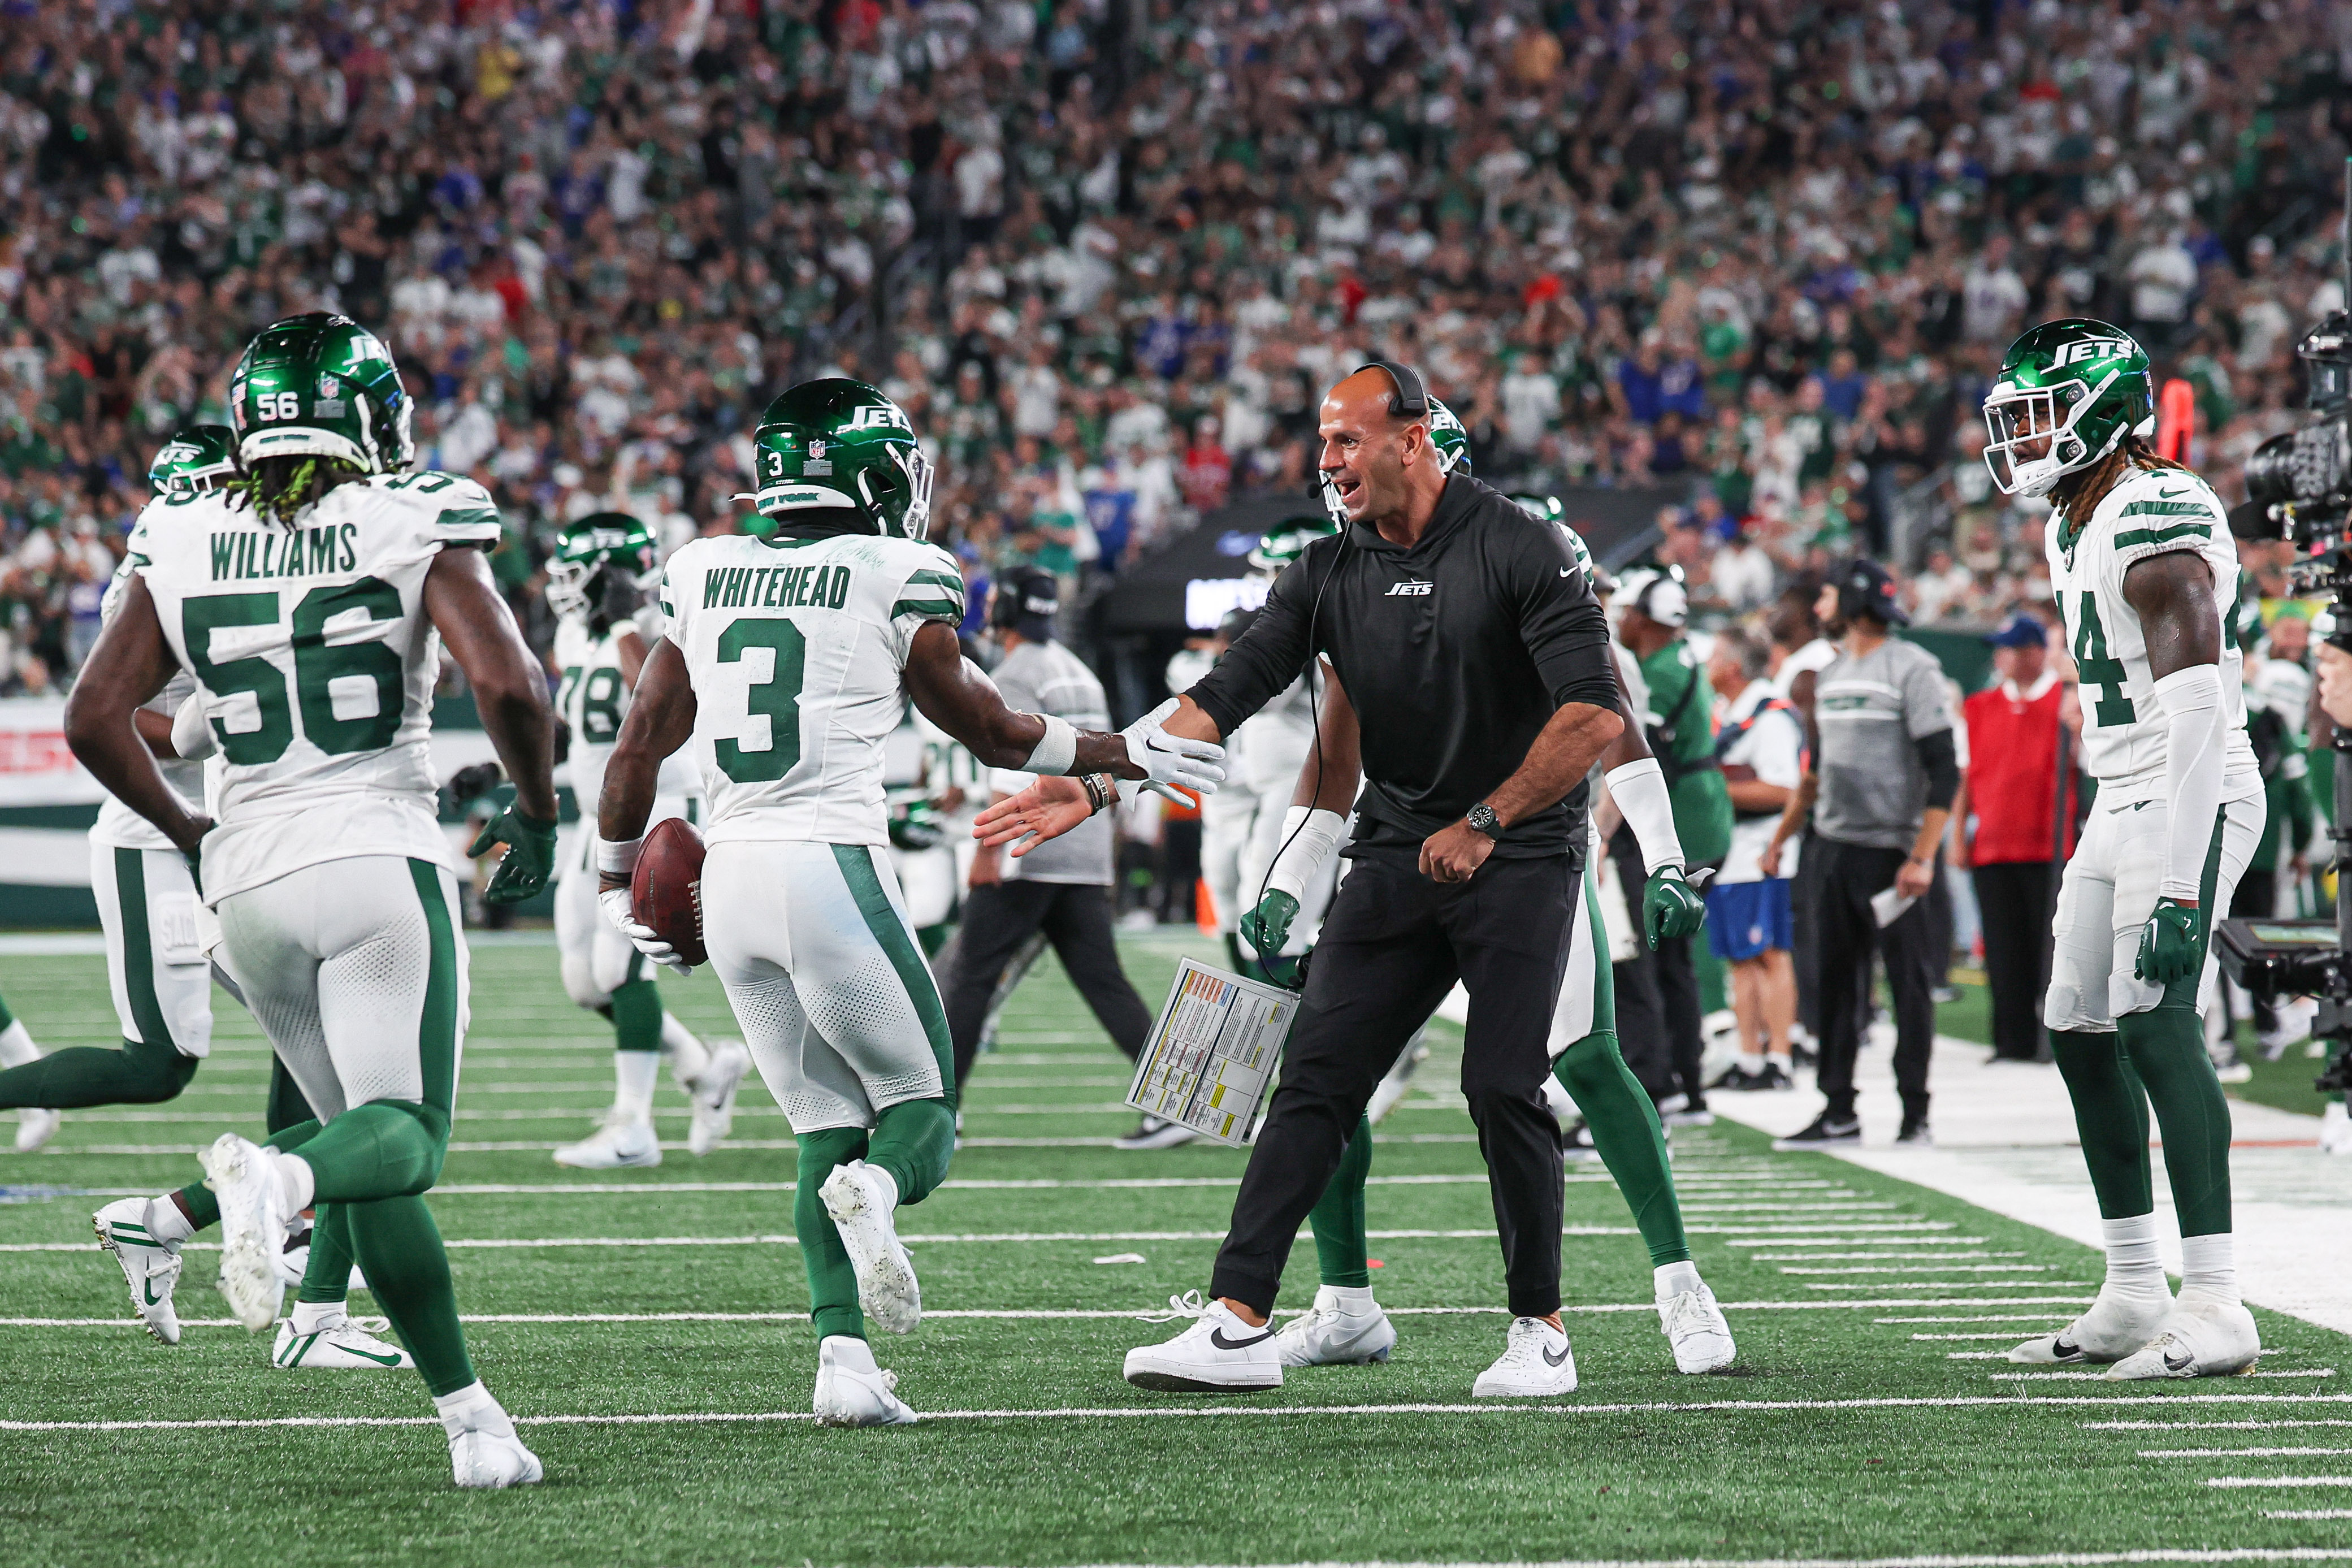 Top NFL Week 2 storylines: Where the New York Jets go from here